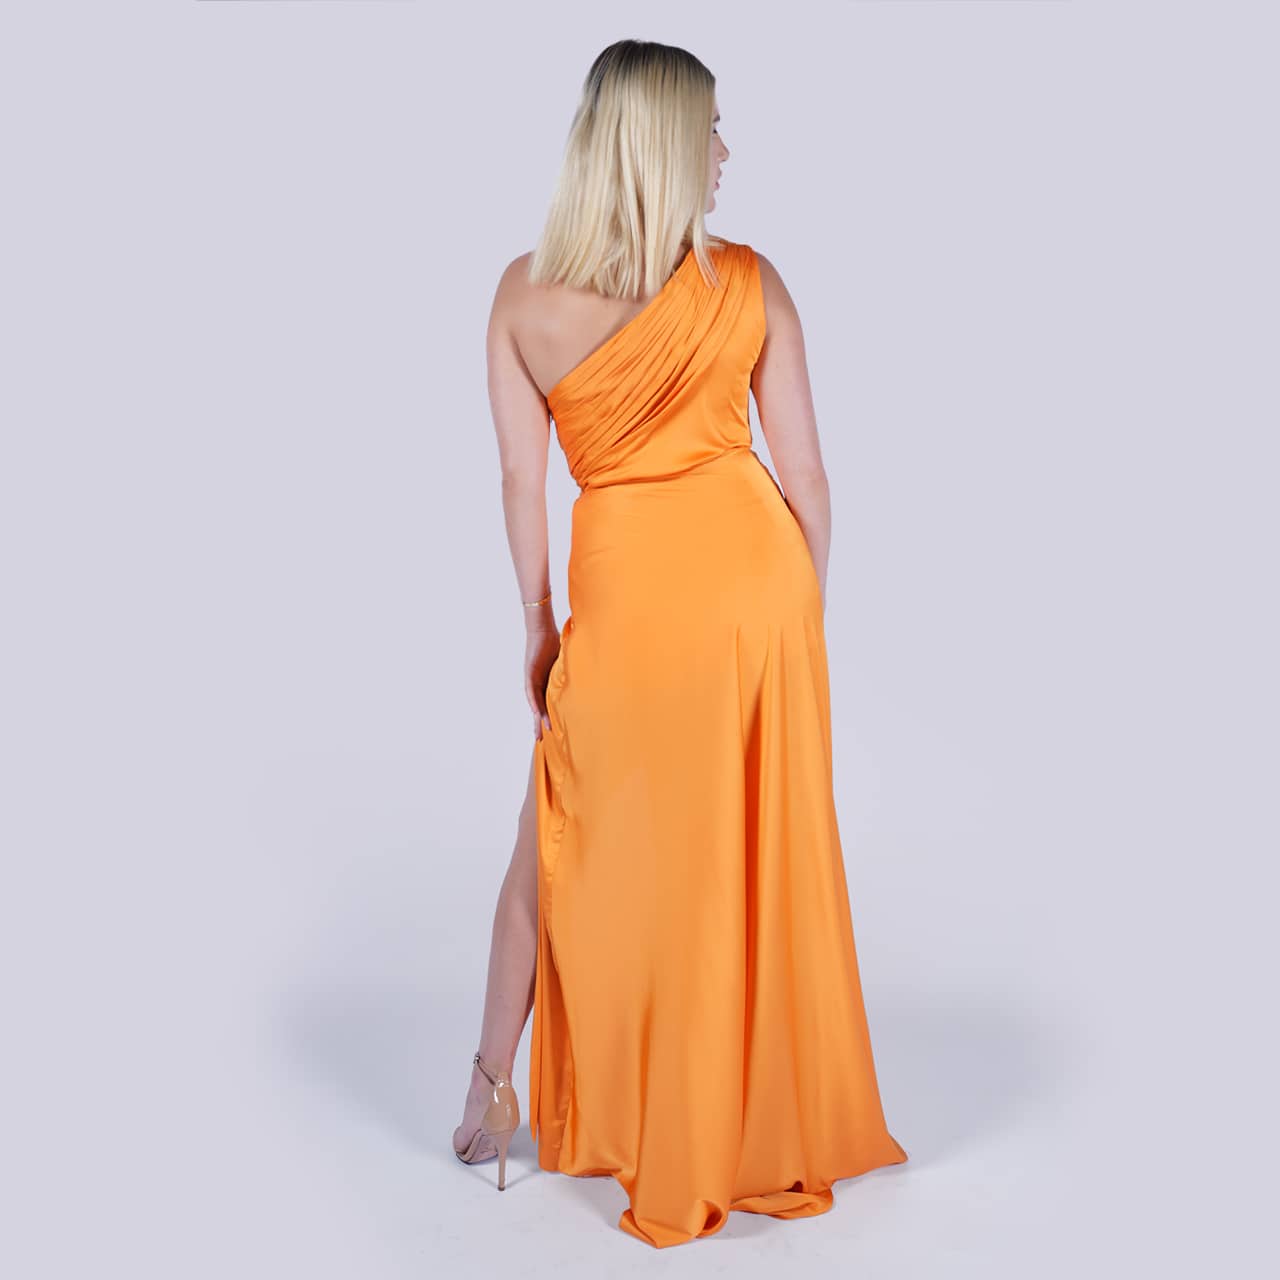 Bliss - Long Satin Gown - NIVA Fashion House